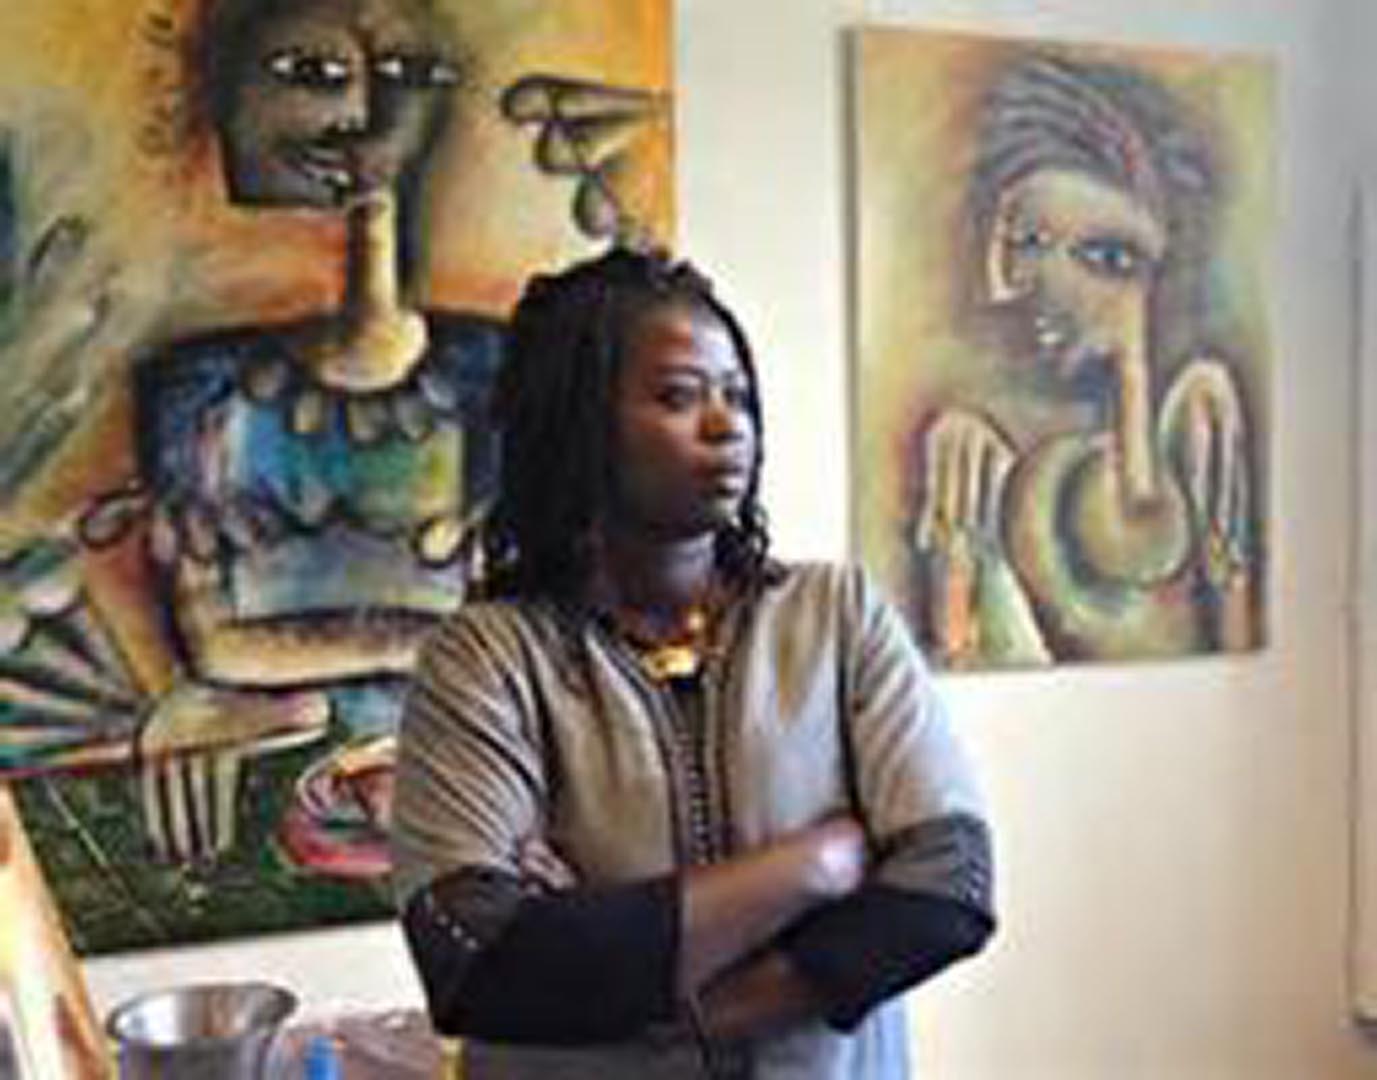 ART AND IDENTITY OR ART AND IDENTITIES? CONTEMPORARY PERSPECTIVES FROM THE AFRICAN ARTIST KINE AW